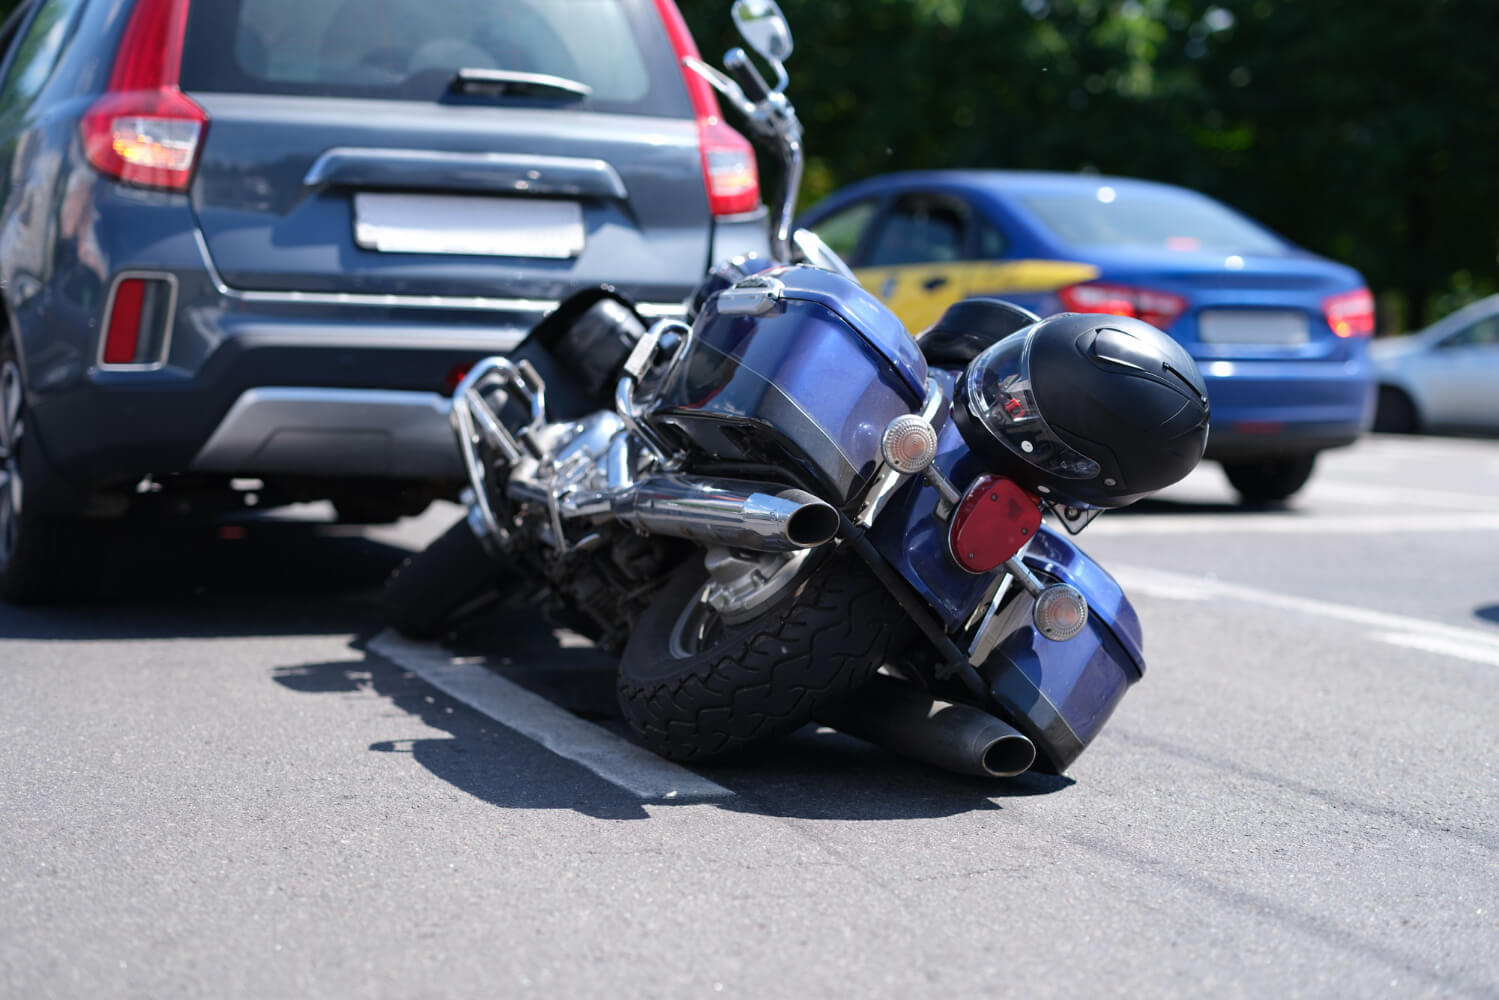 blue motorcycle lying road near car closeup - Motorcycle Accident